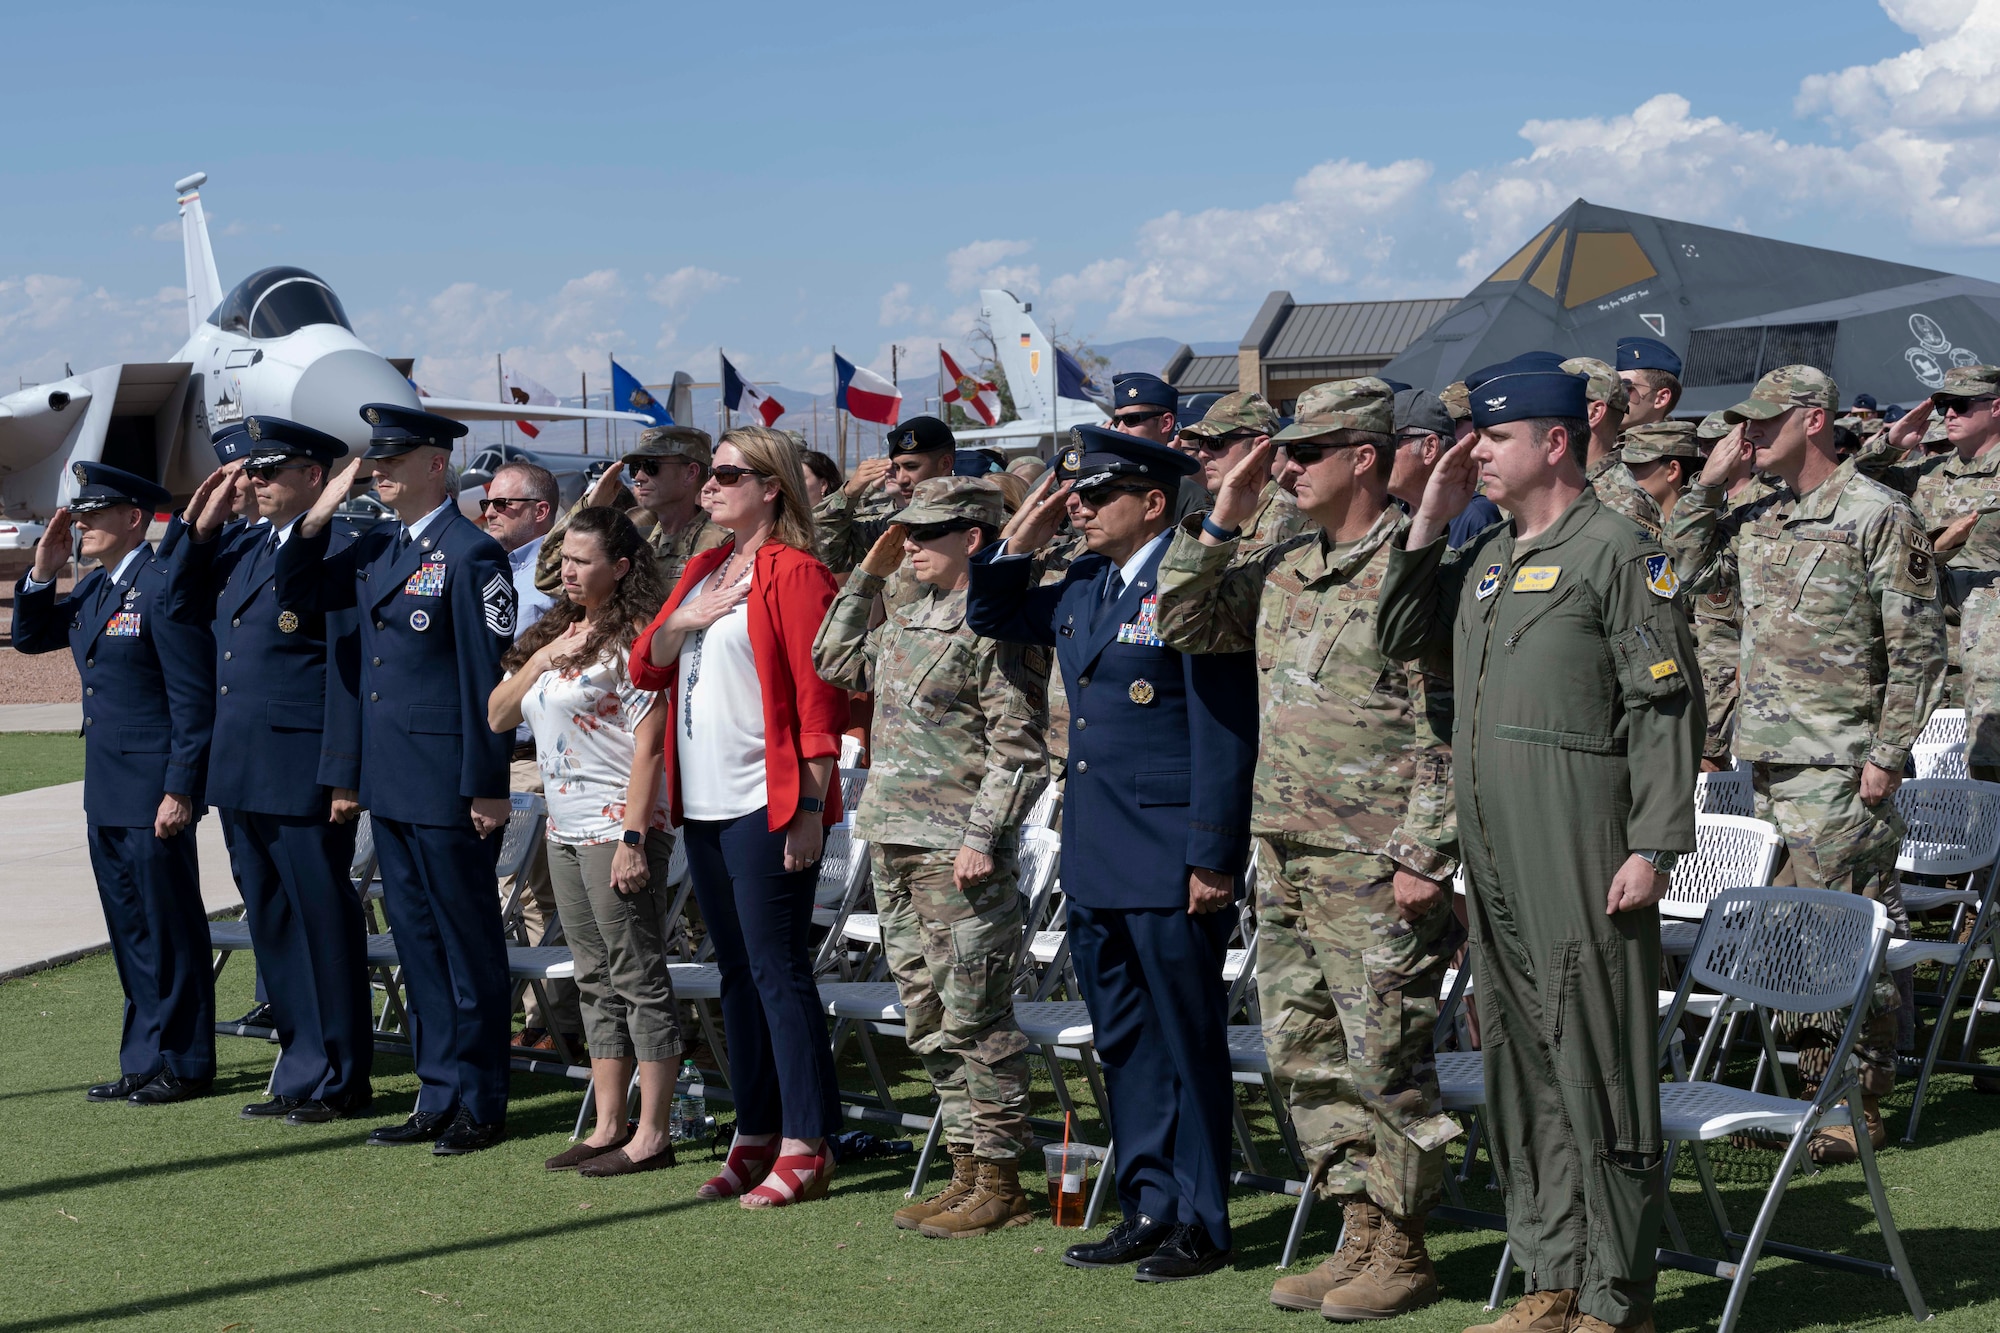 Servicemembers and Team Holloman honor the fallen heroes during a Memorial Day ceremony at Holloman Air Force Base, New Mexico, May 25, 2023. Memorial Day is a federal holiday in the United States for honoring and mourning the U.S. military personnel who died while serving in the United States Armed Forces. (U.S. Air Force photo by Airman 1st Class Michelle Ferrari)